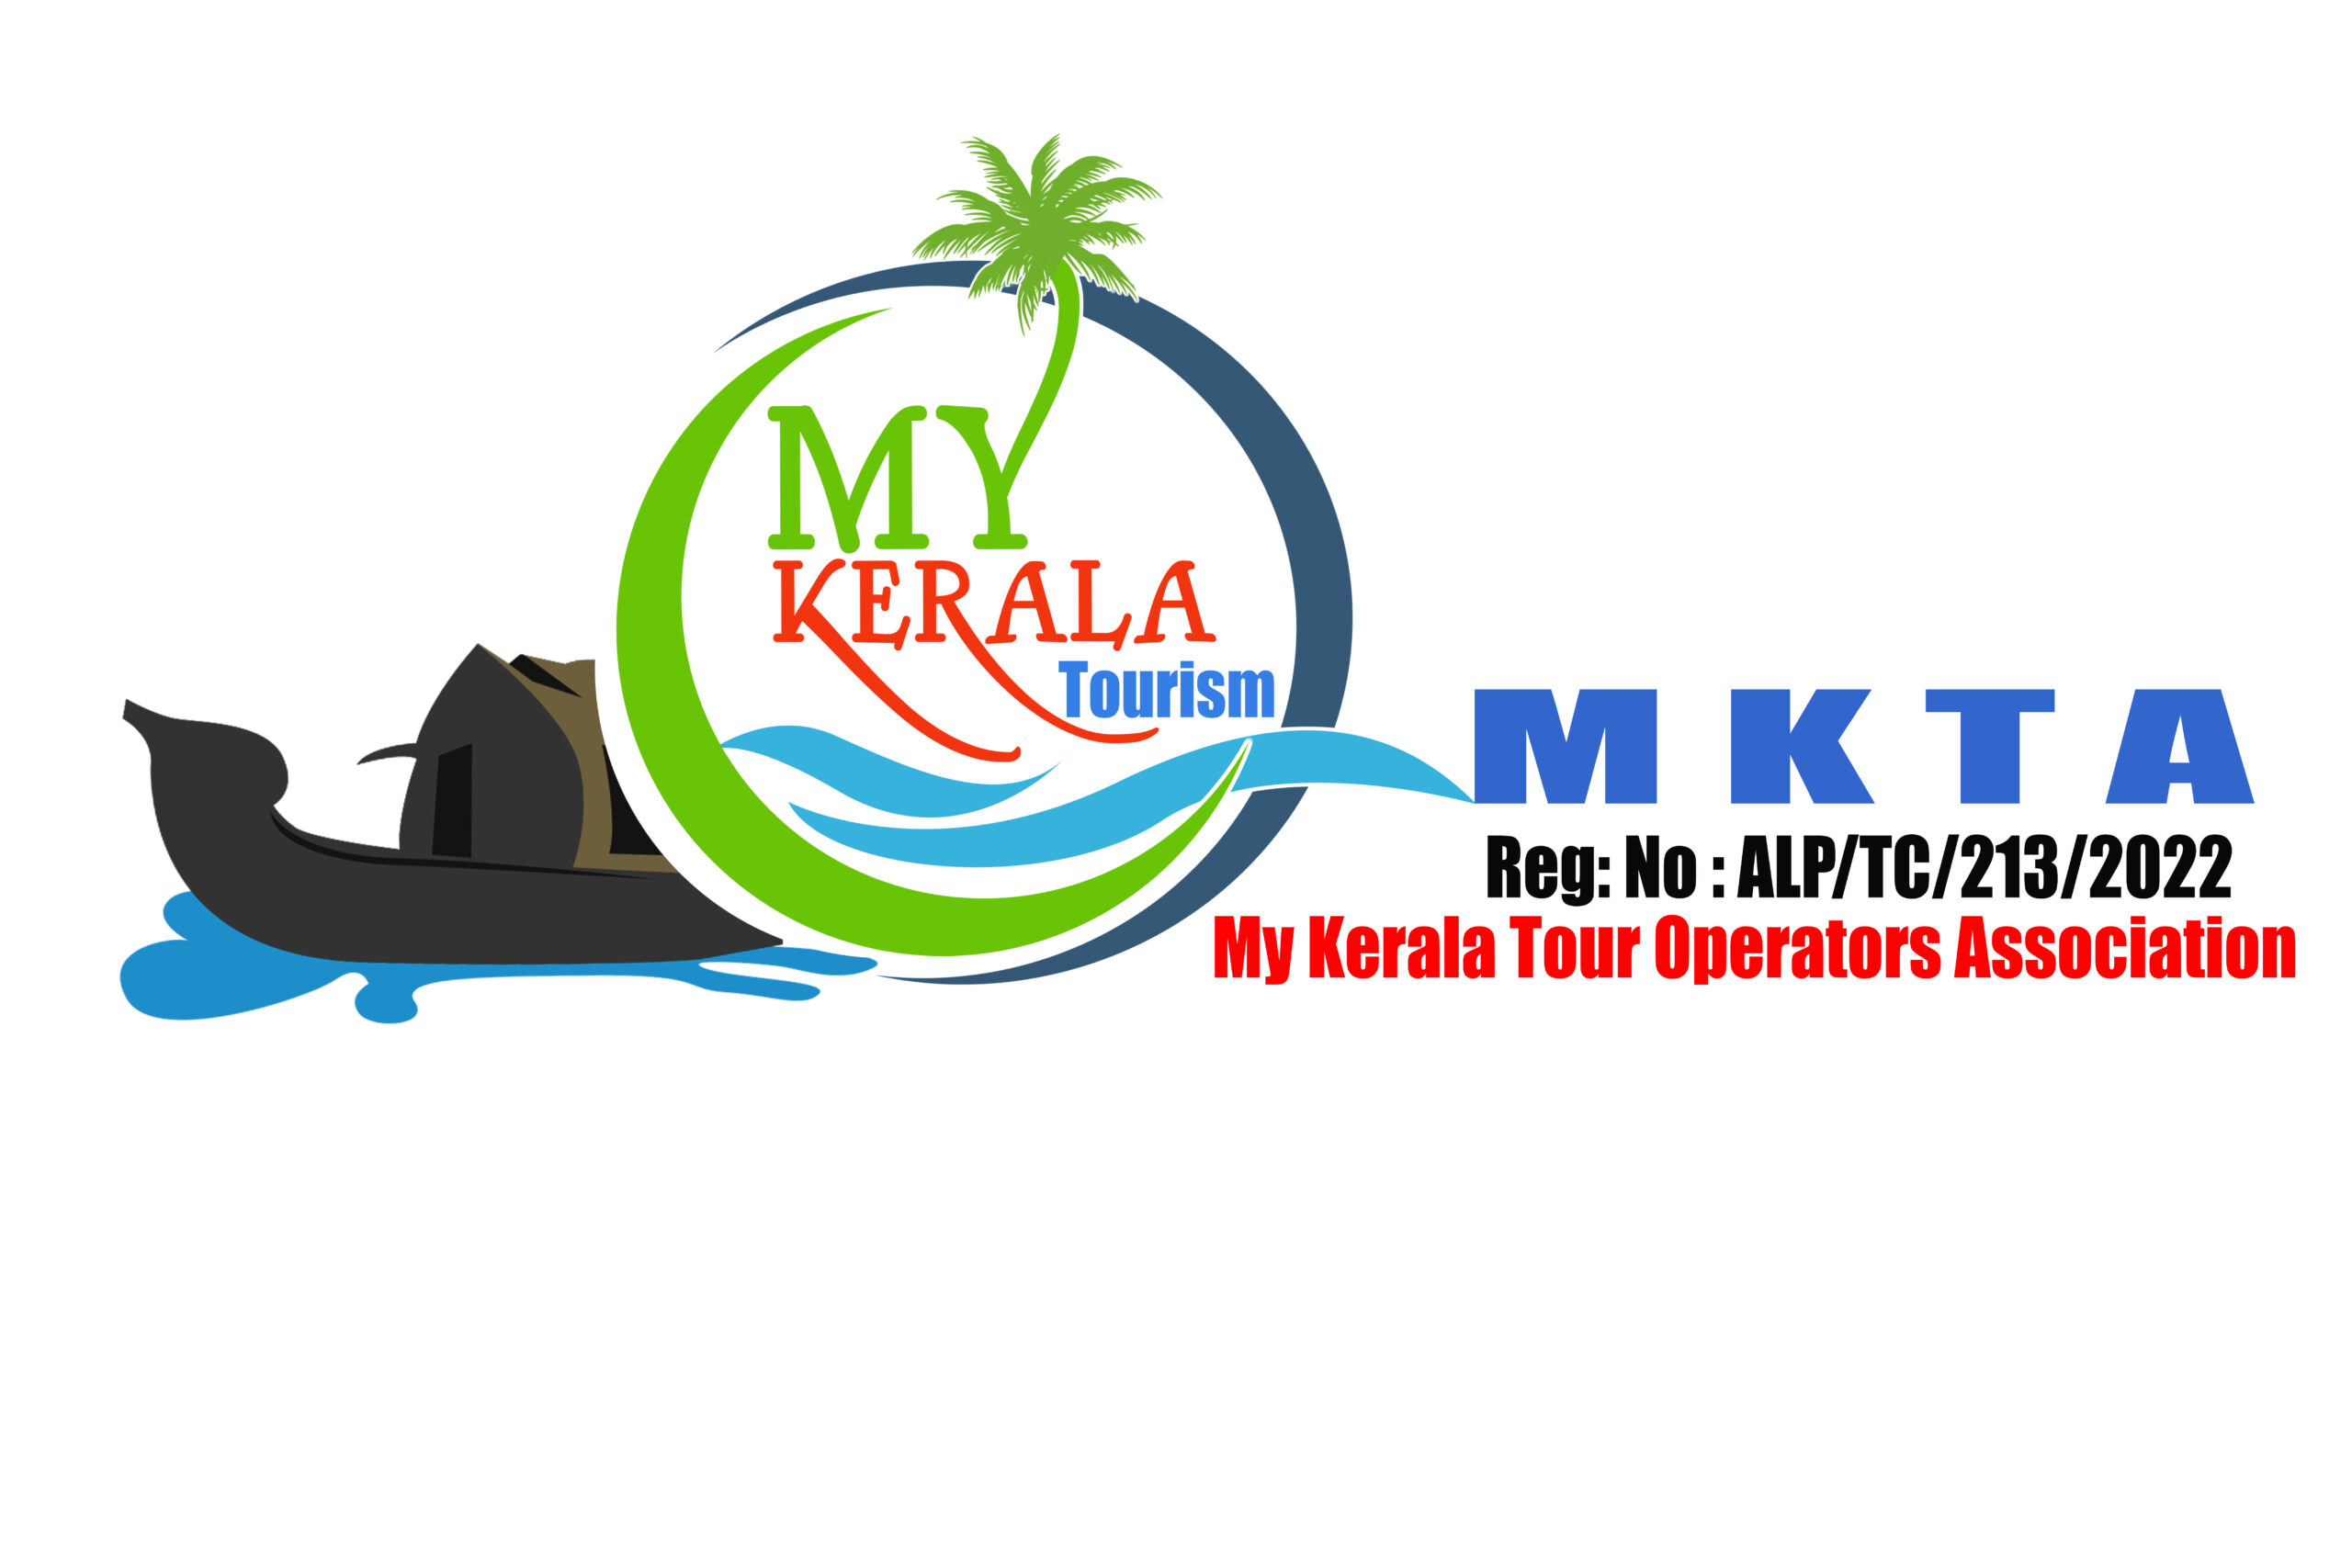 Kerala Tourism Advertising Campaigns Can Teach You So Many Marketing  Lessons - Marketing Mind